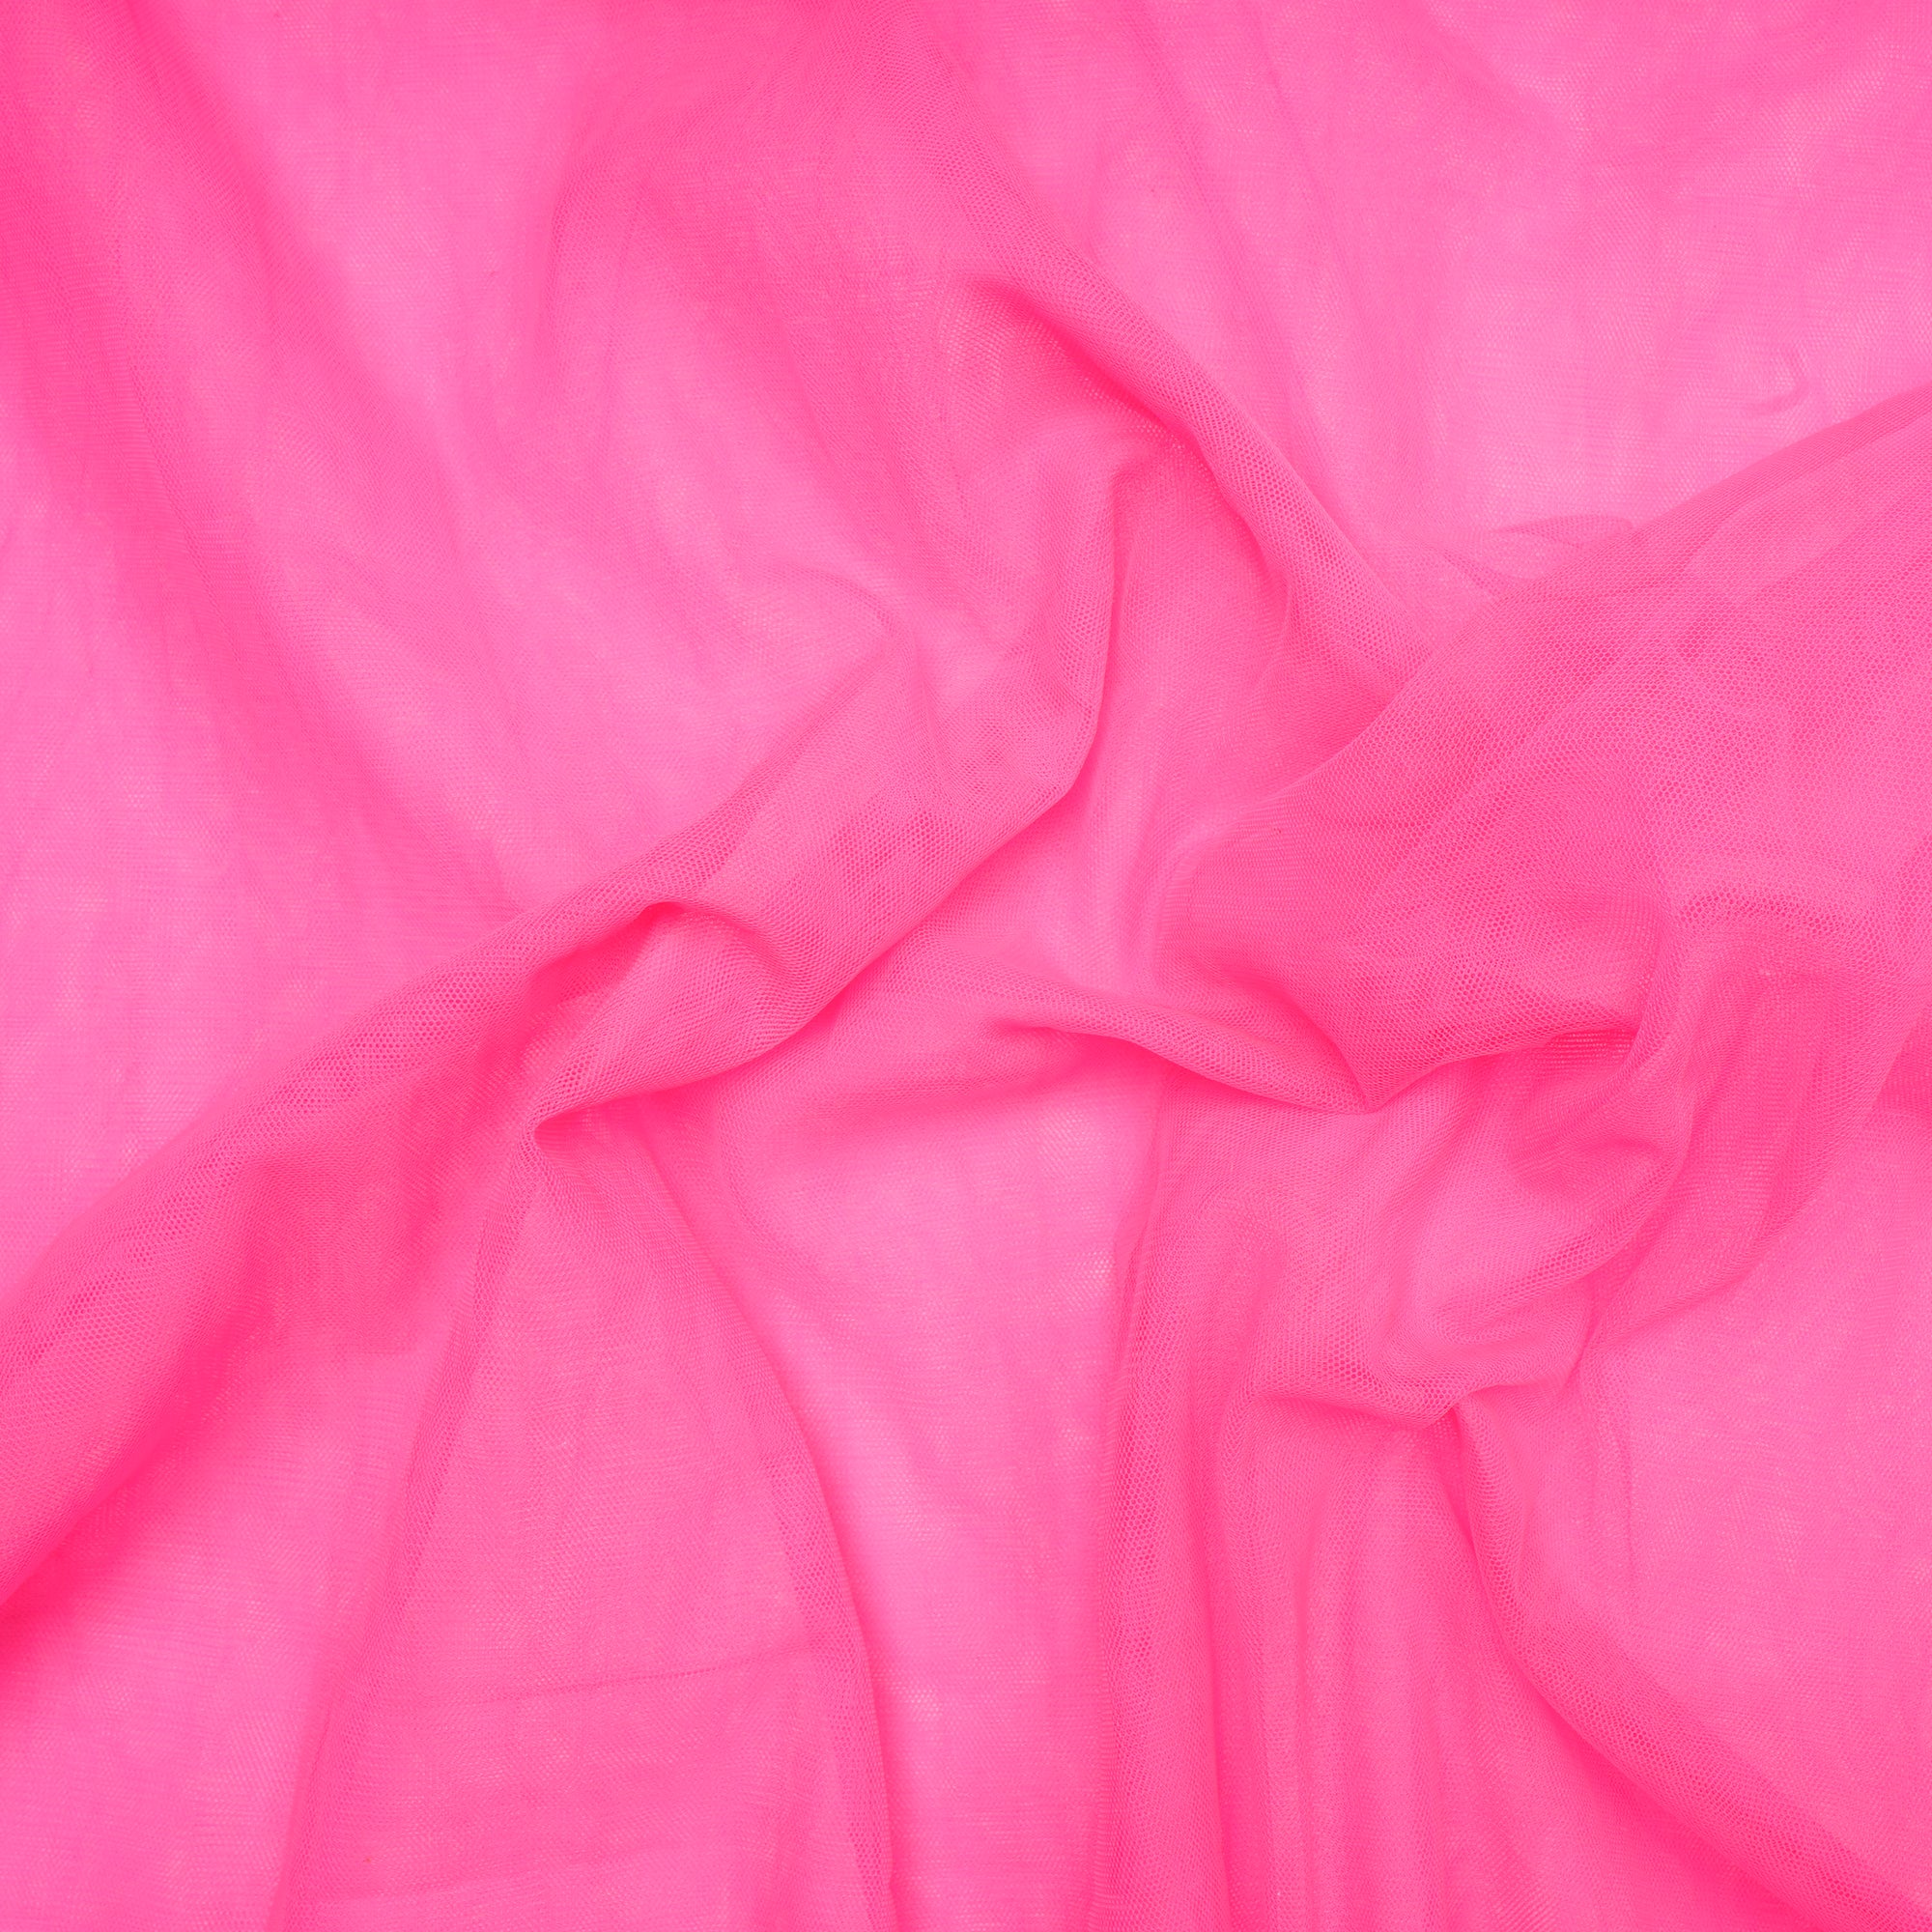 Neon Pink Color Nylon Butterfly Net Fabric